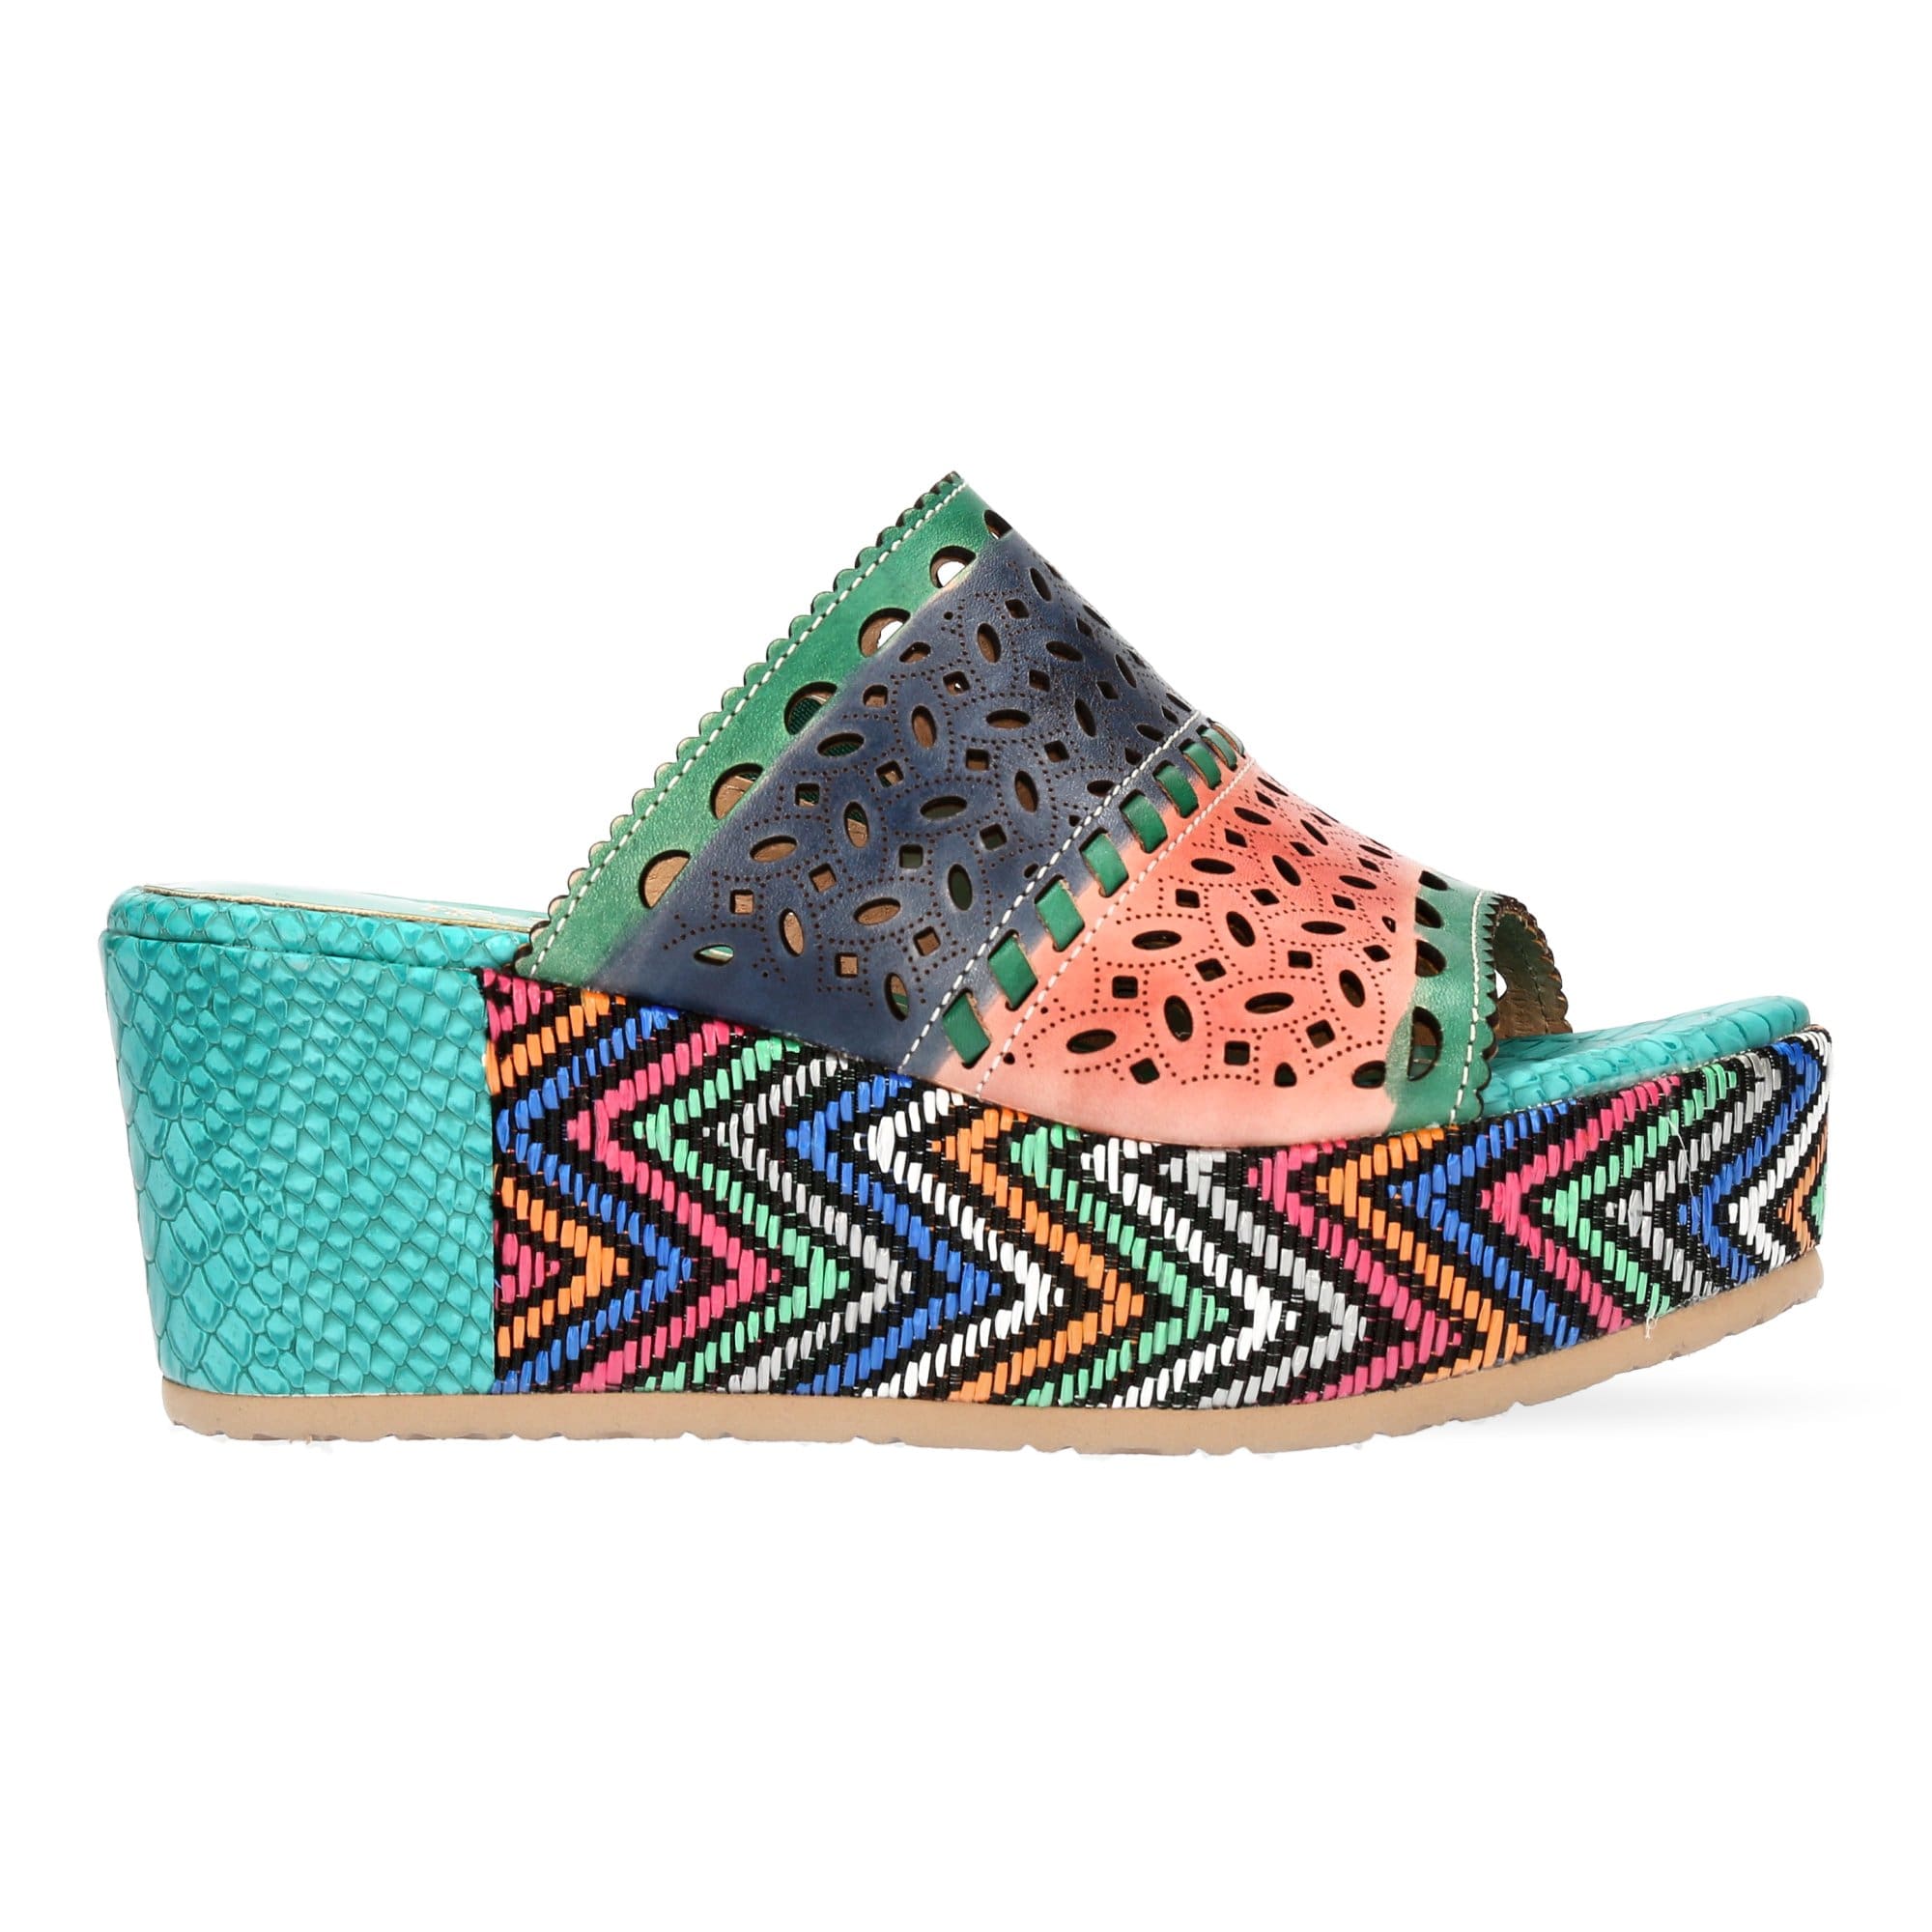 Chaussures JACMBEO 01 - Mule